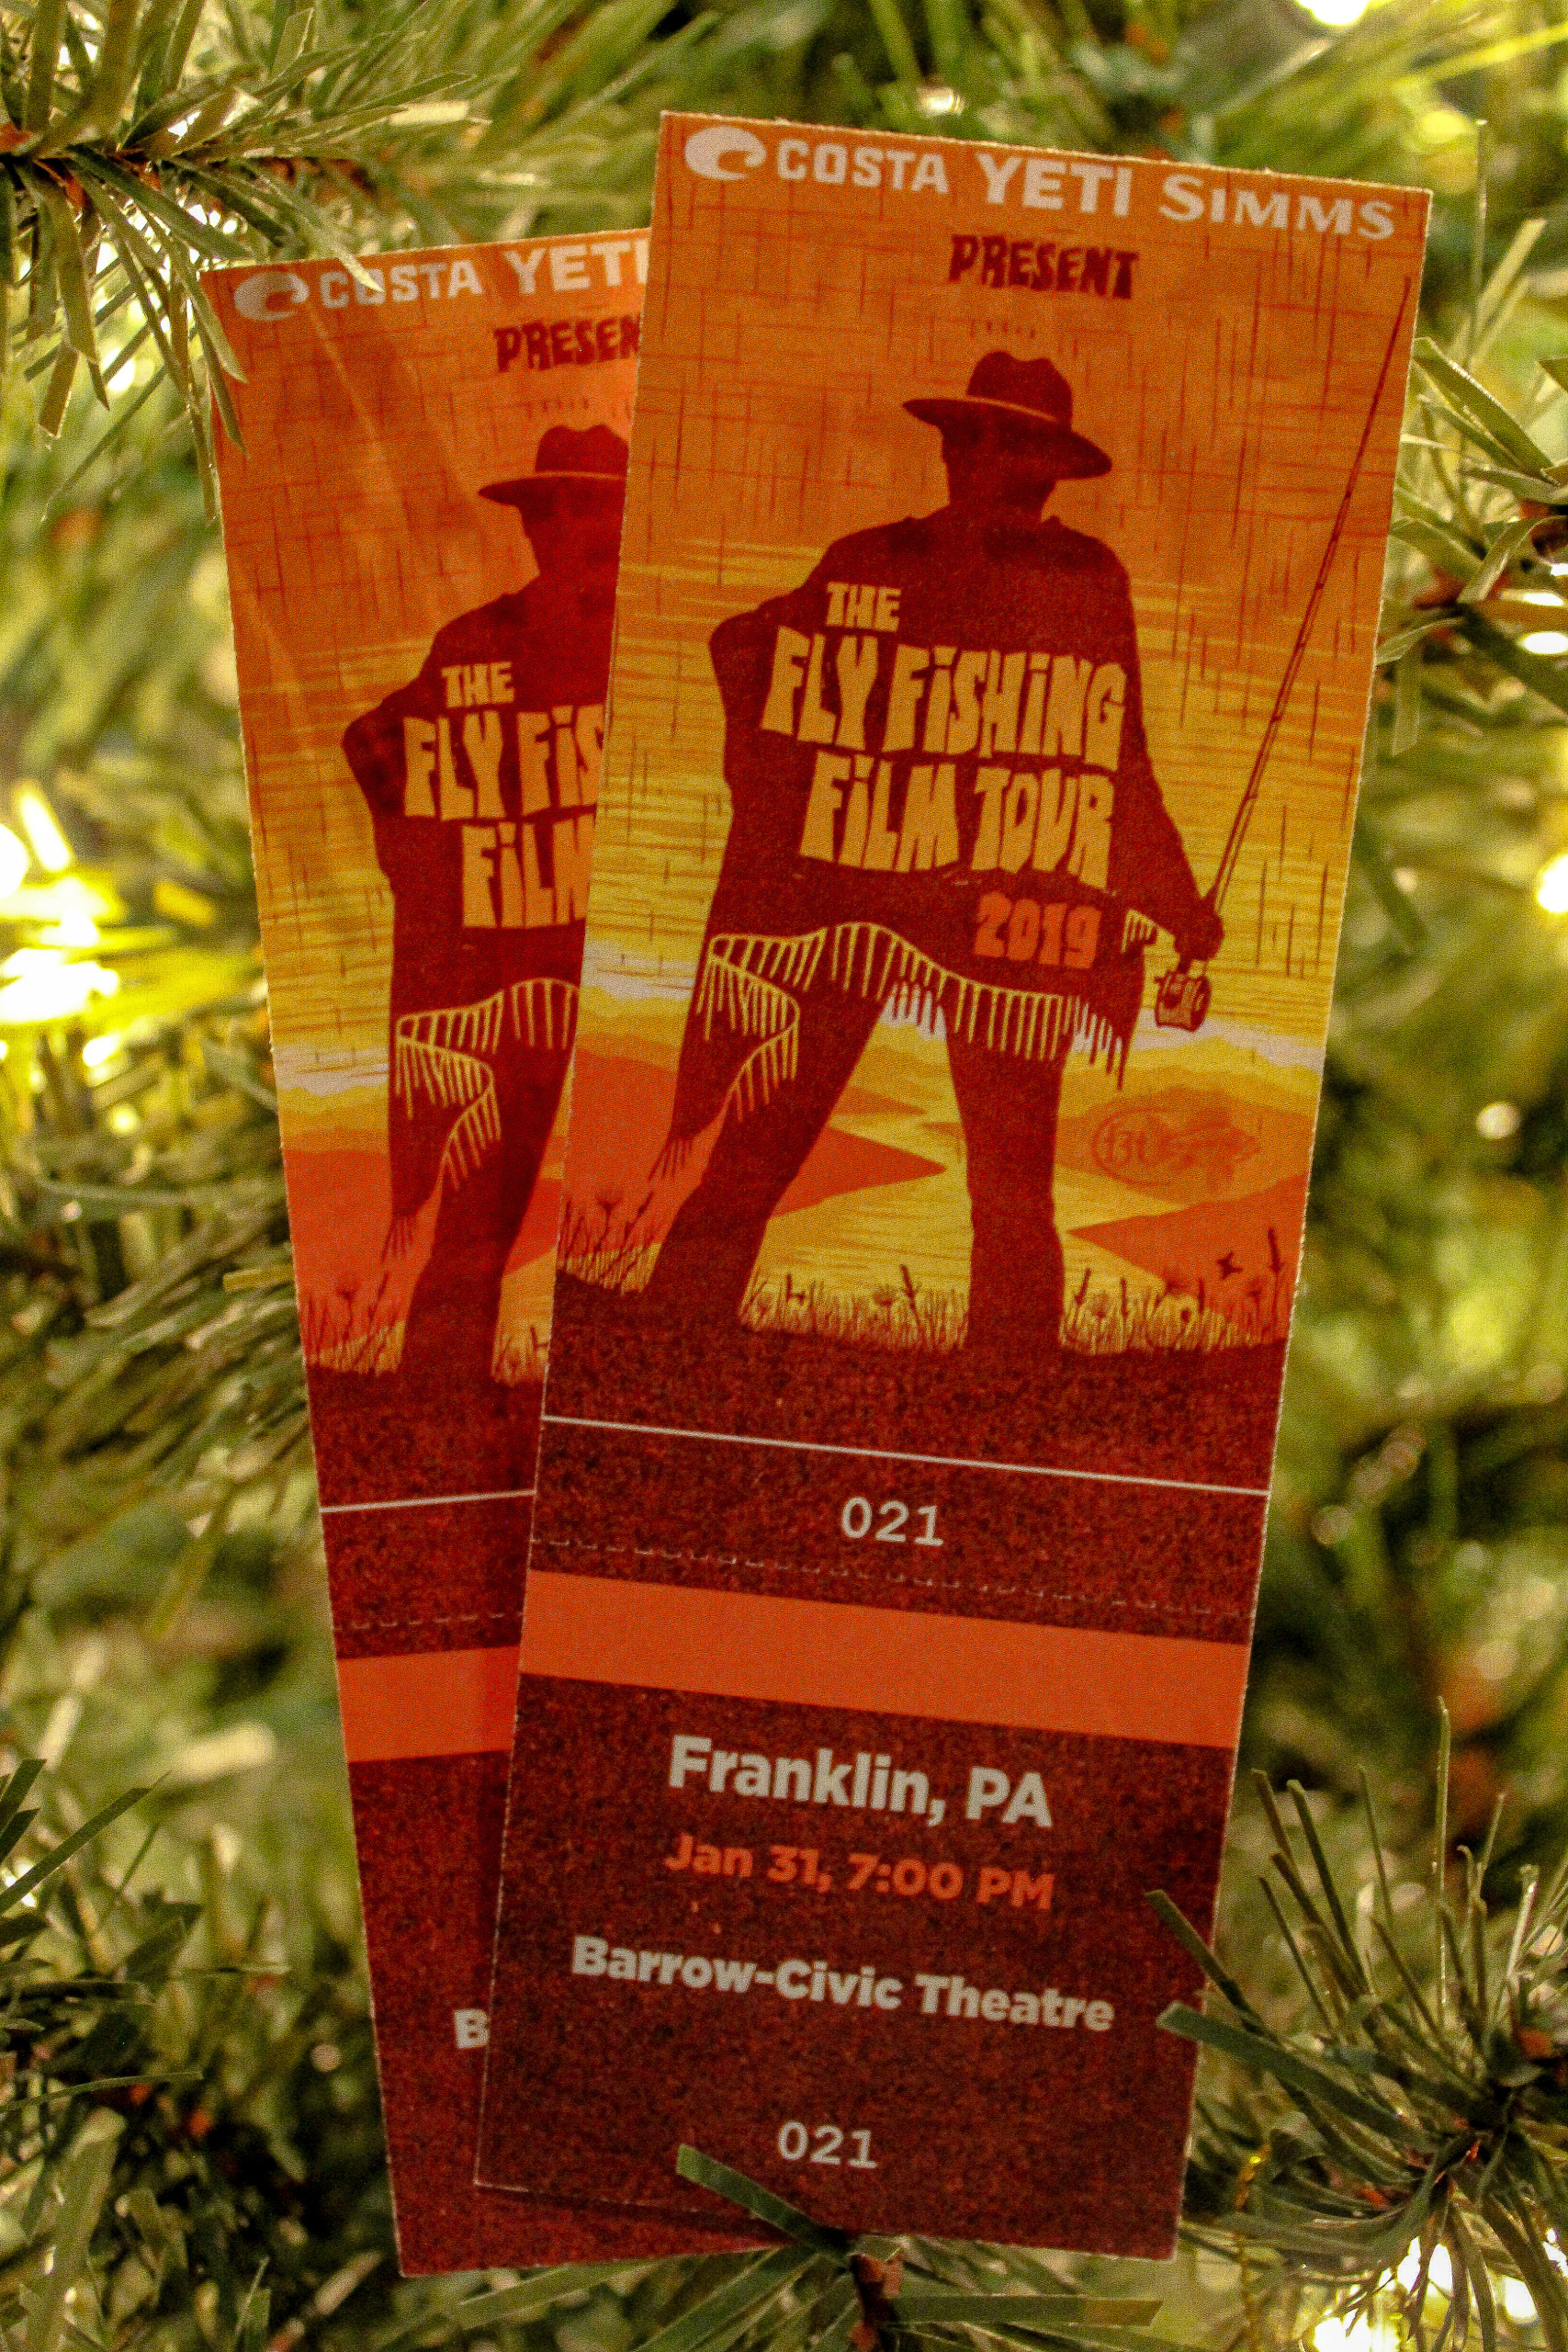 Fly fishing film tour ticket, film tour, Franklin, fly fishing